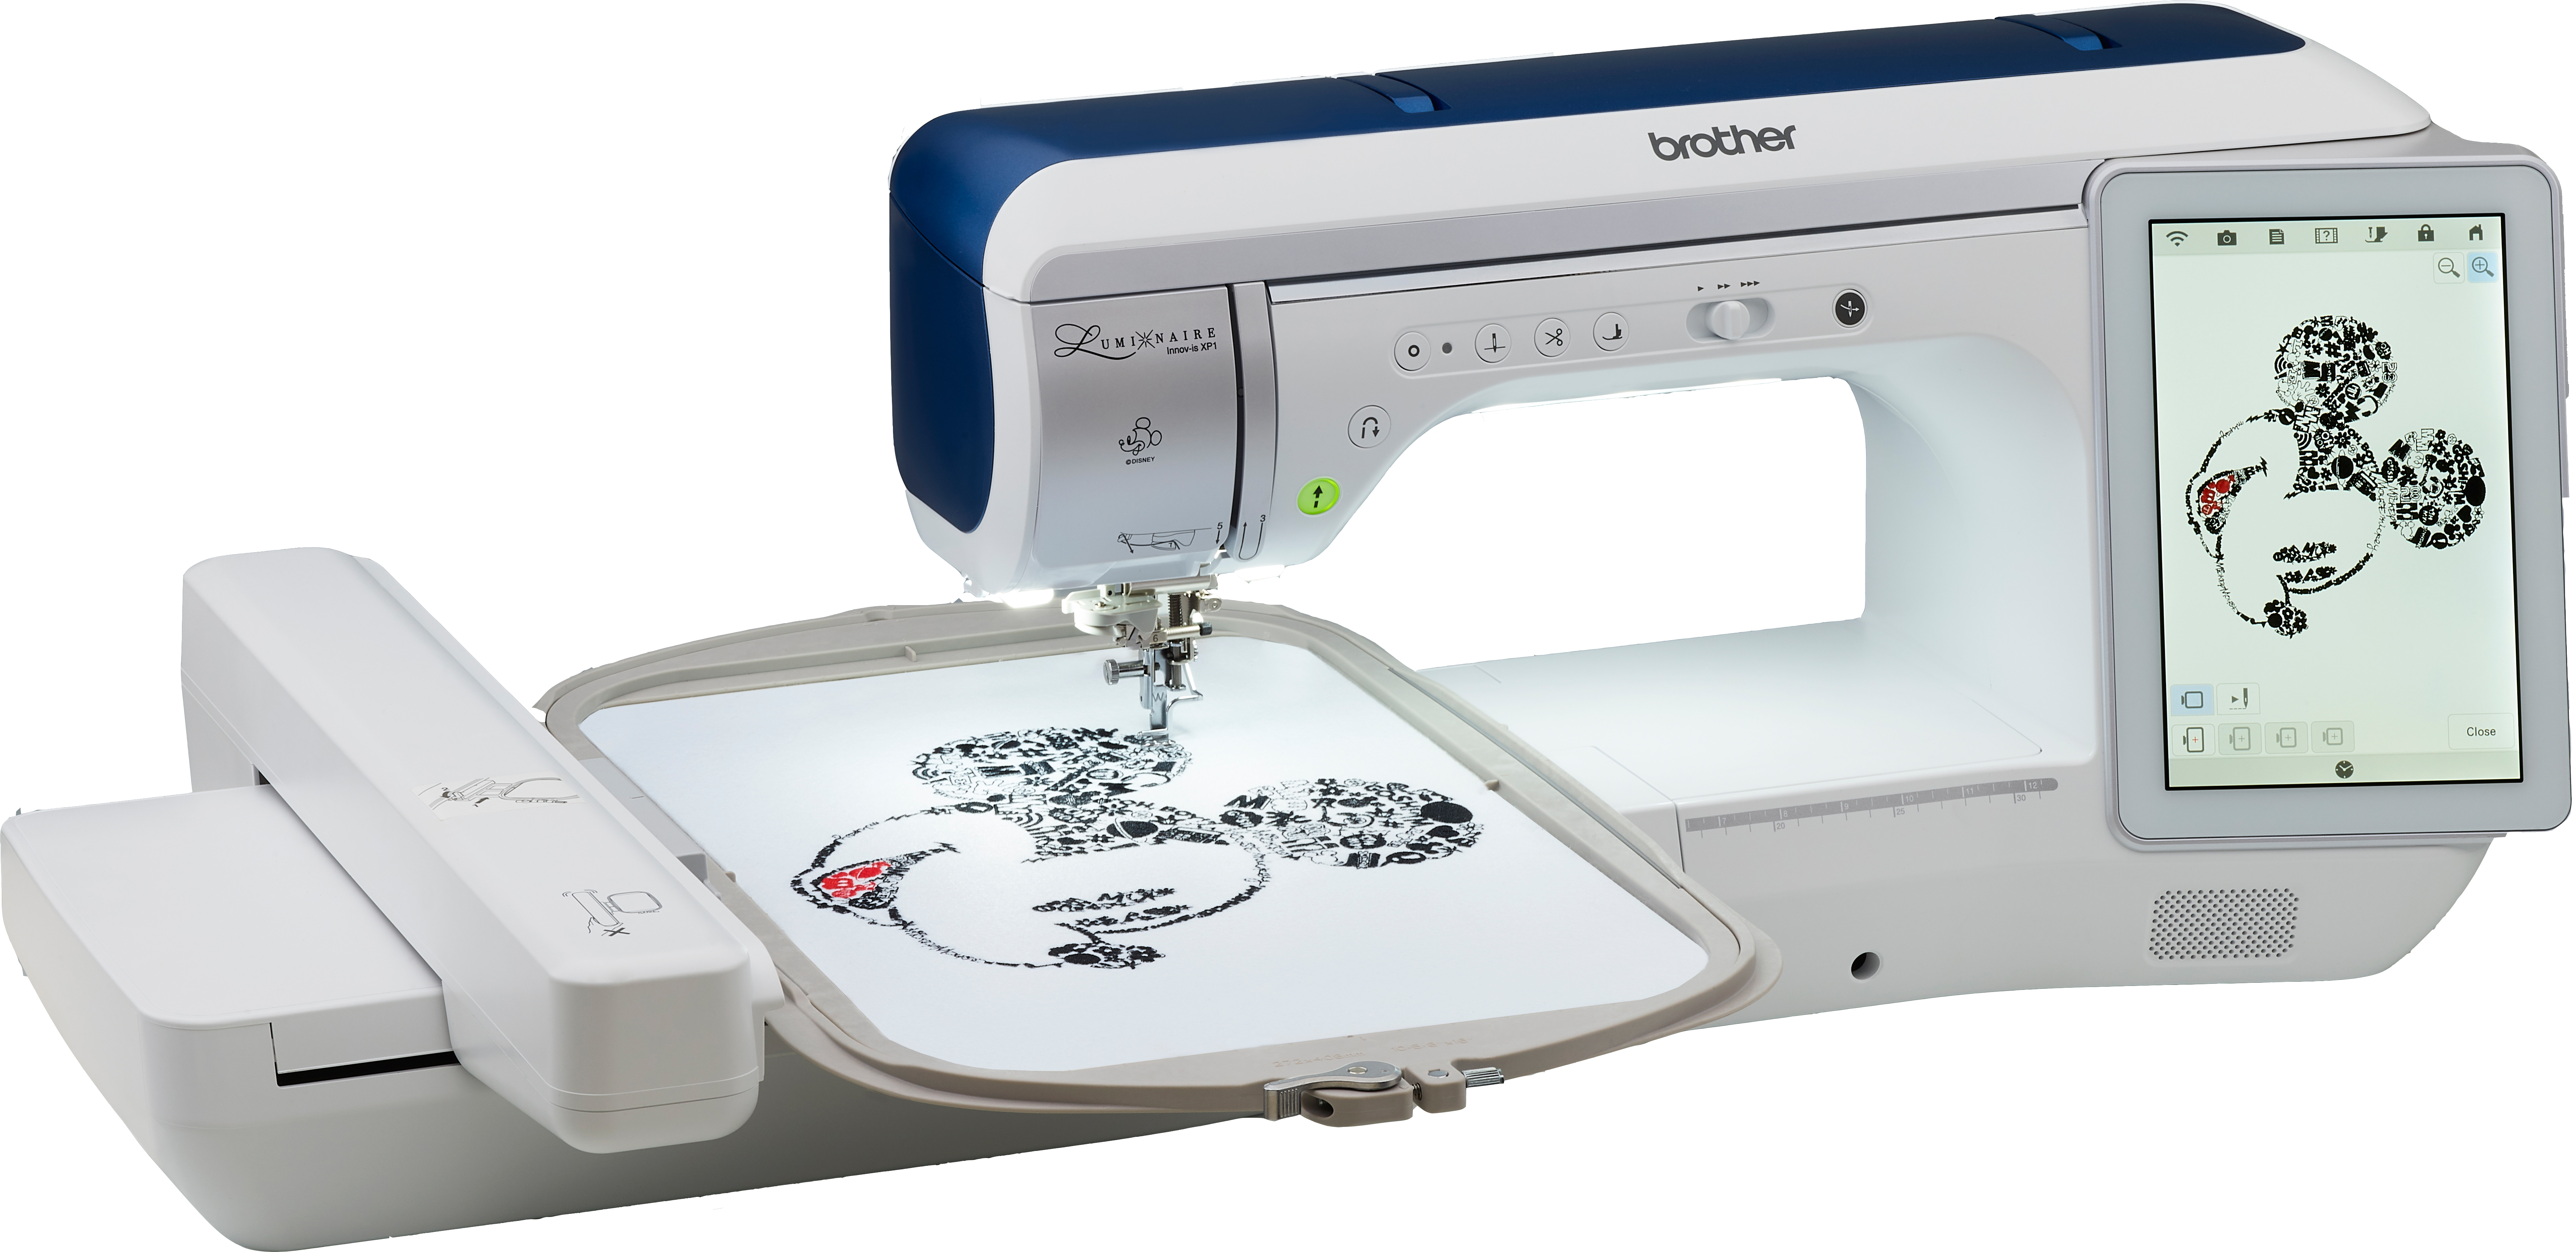 Brother Sewing Machine Embroidery Patterns Brother Luminaire Innov Is Xp1 See It First At All Moores Socal